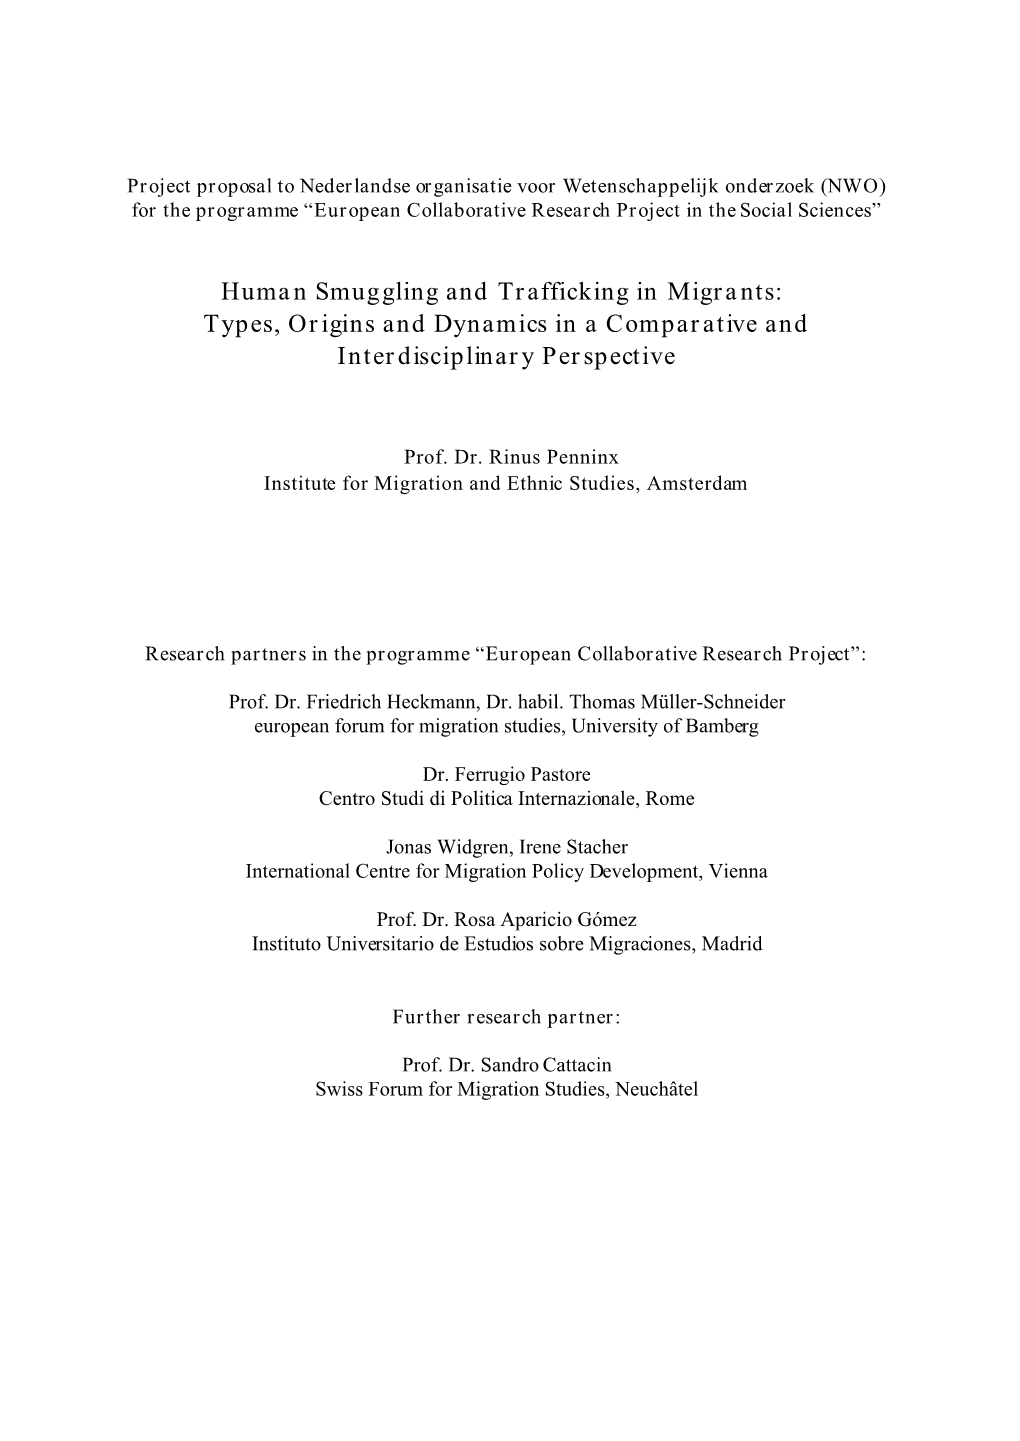 Human Smuggling and Trafficking in Migrants: Types, Origins and Dynamics in a Comparative and Interdisciplinary Perspective